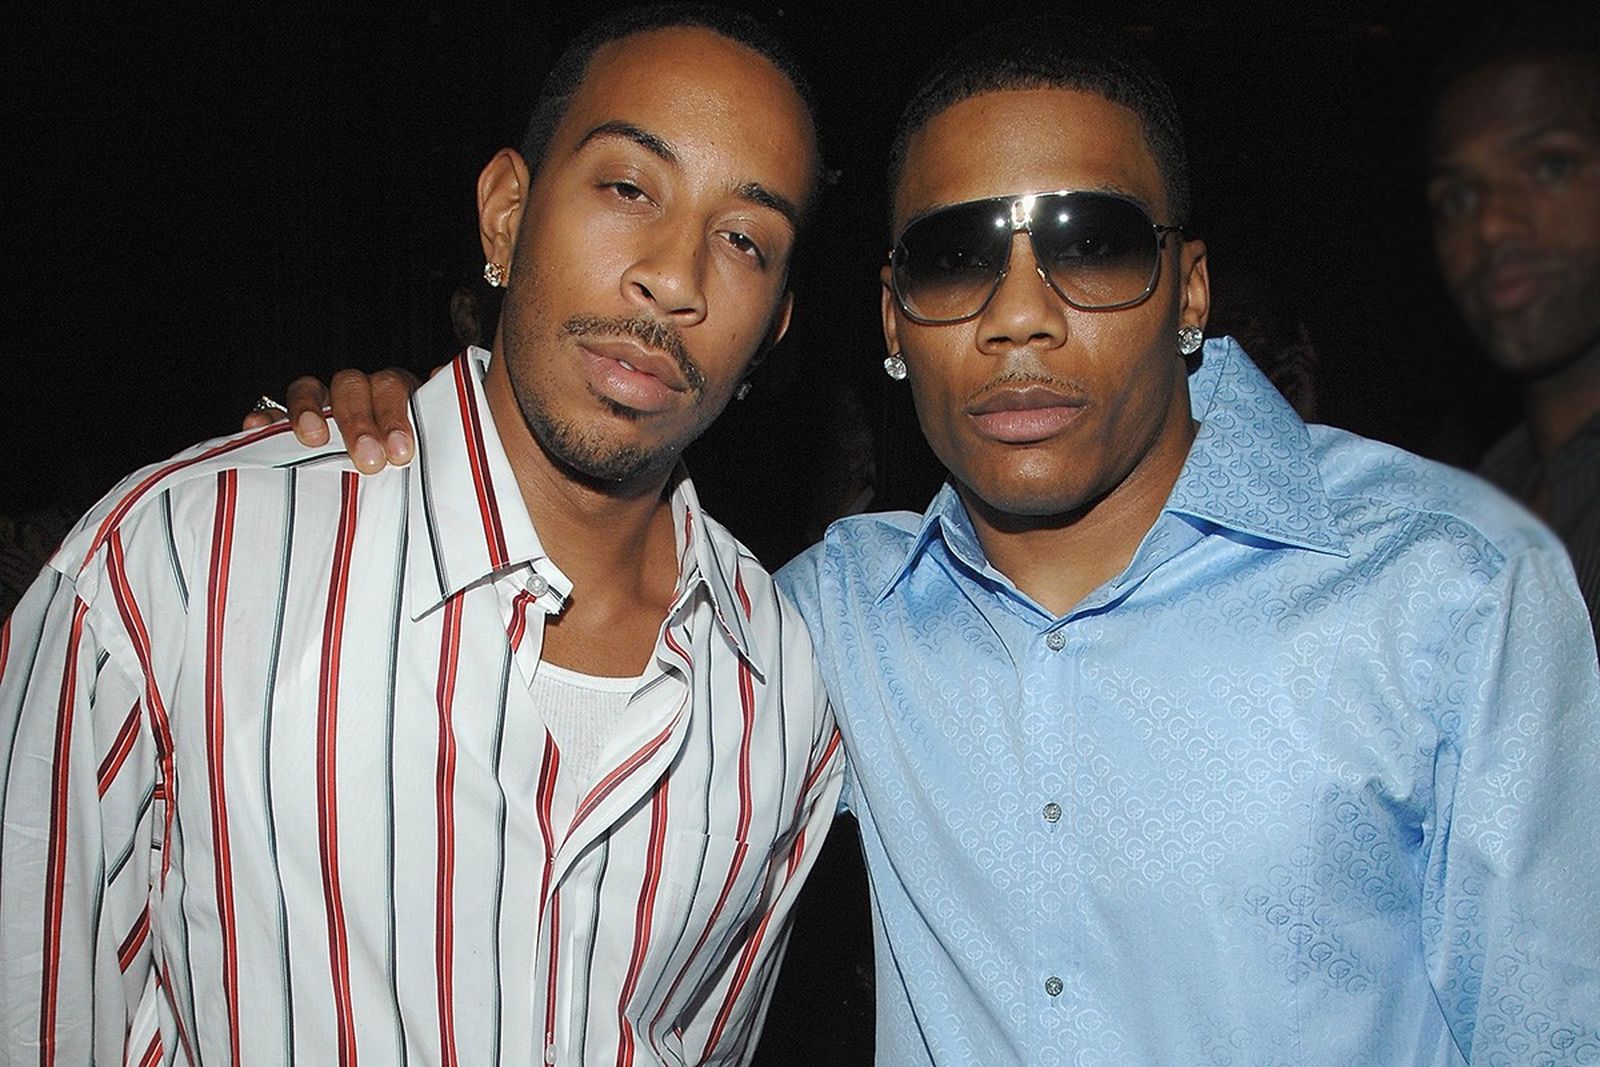 Nelly and ludacris pose at ushers fragrance launch